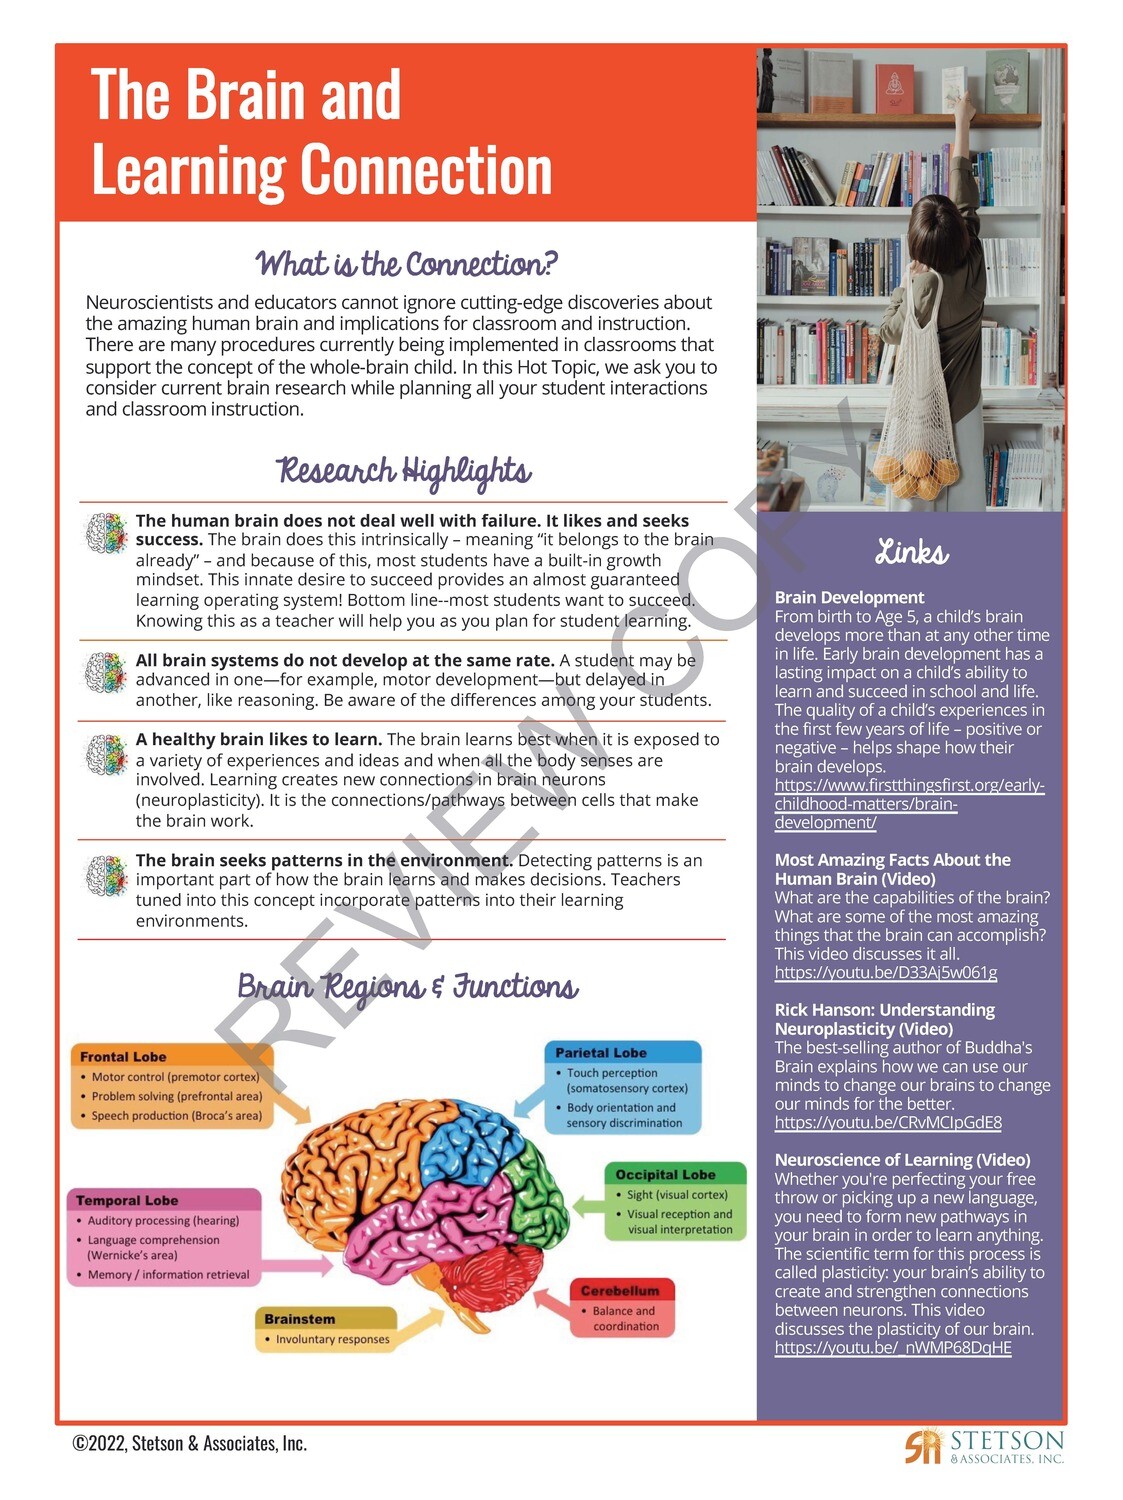 The Brain and Learning Connection Information Card